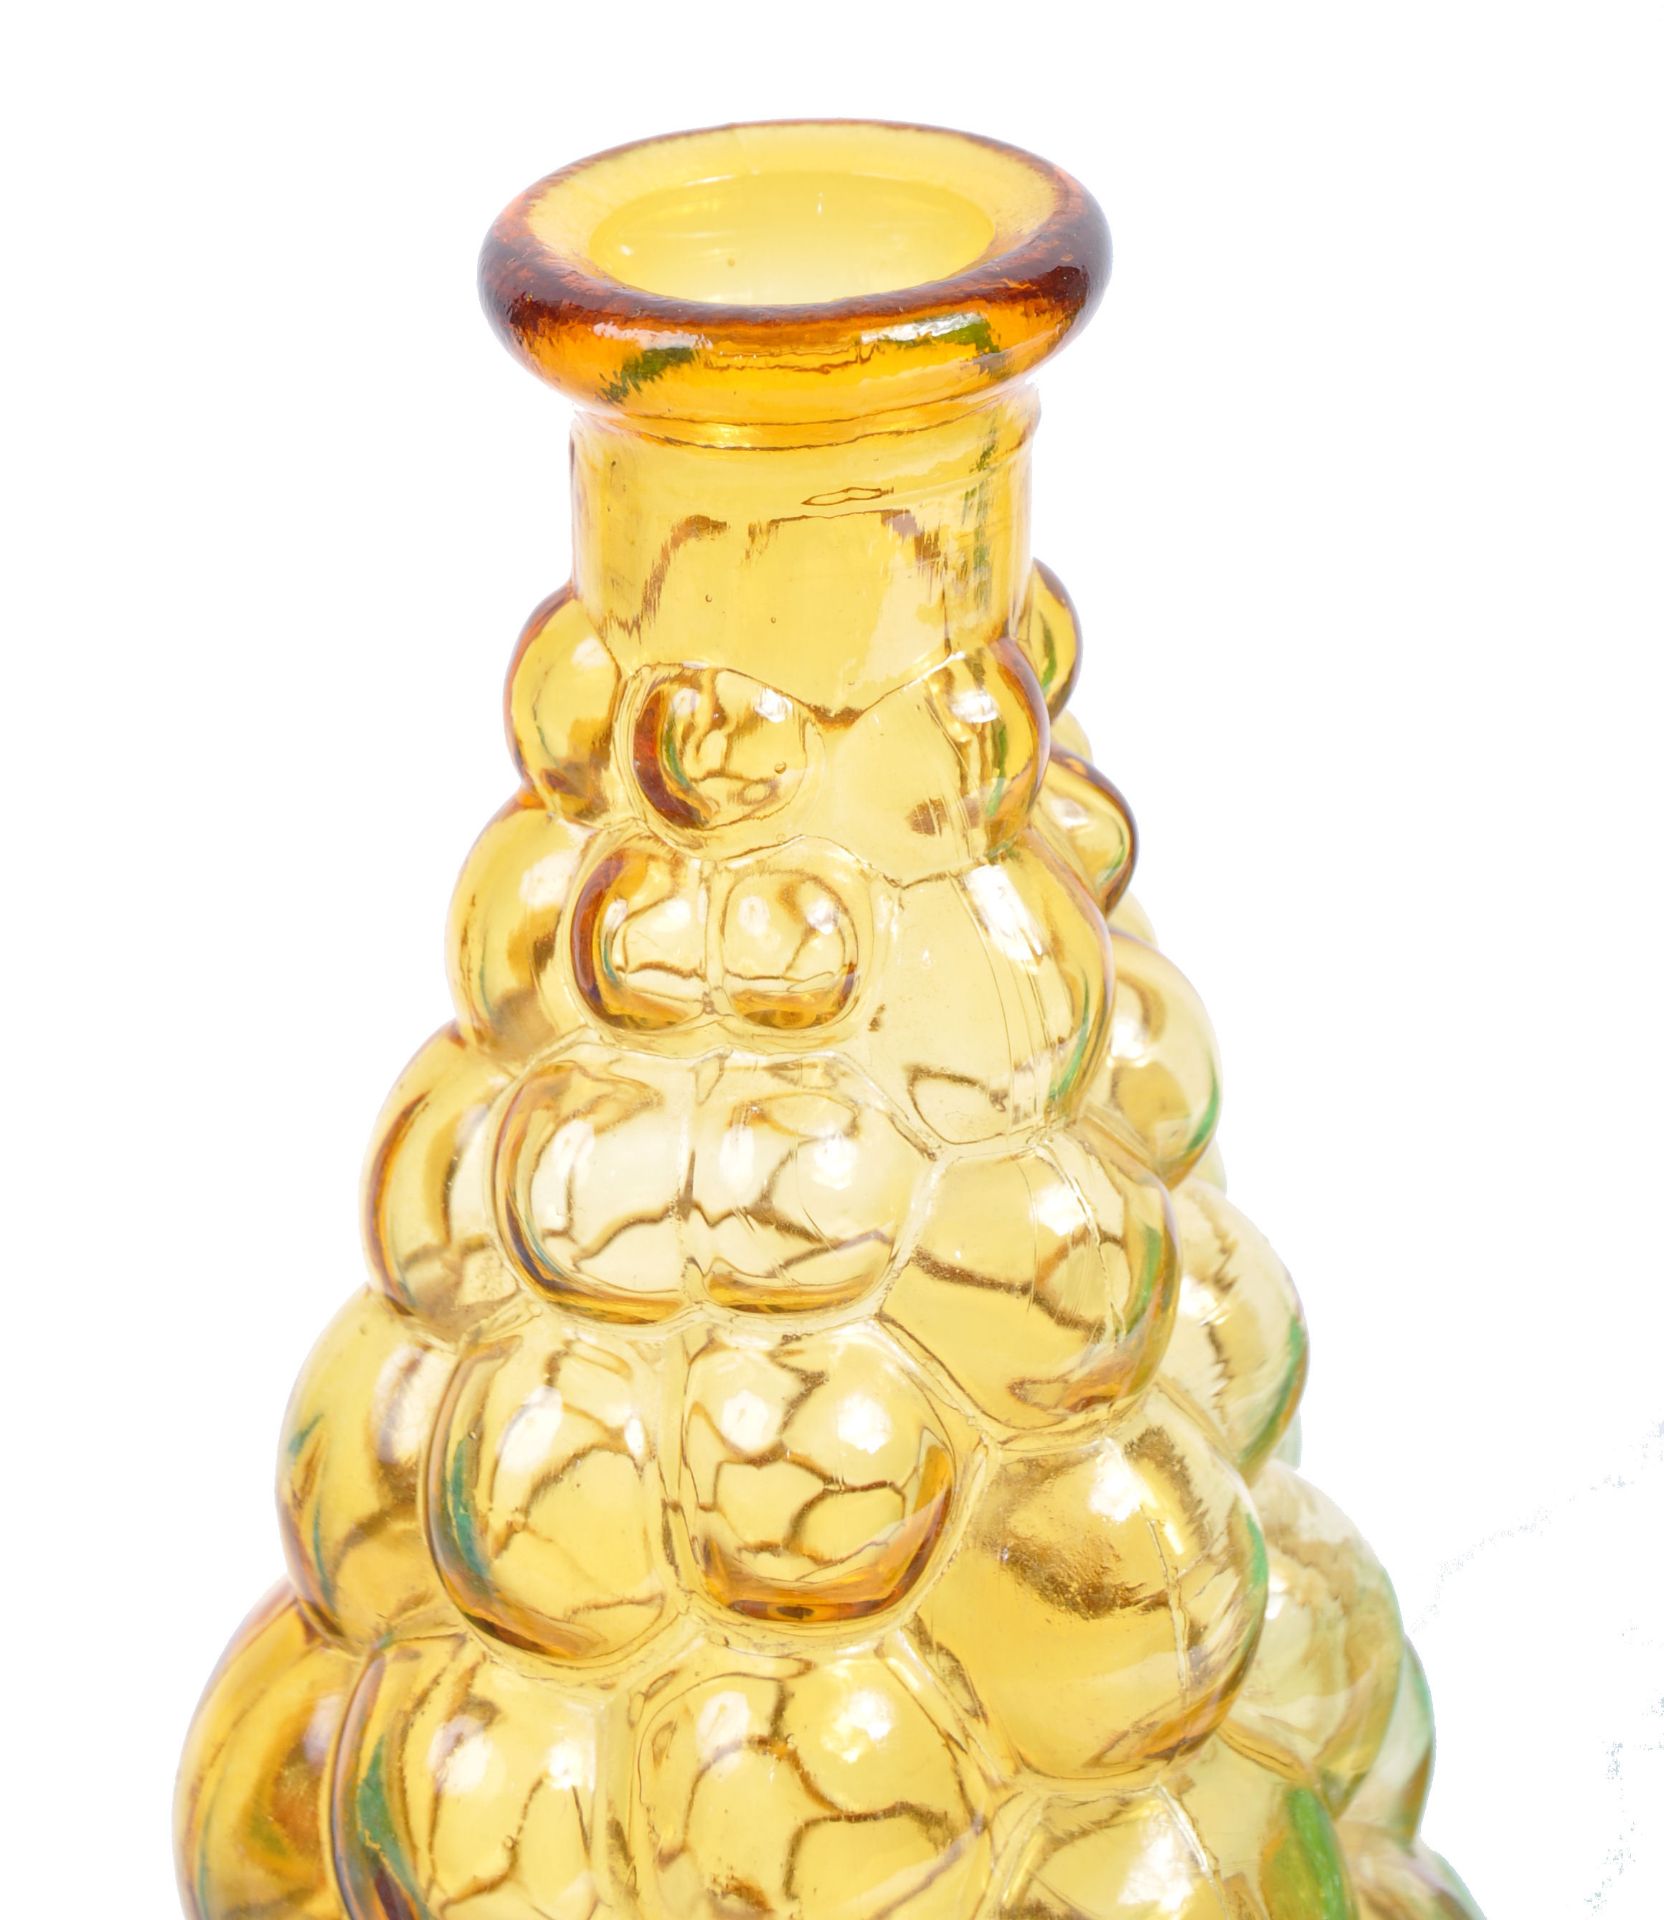 COLLECTION OF EMPOLI ITALIAN GLASS GENIE BOTTLES - Image 5 of 5